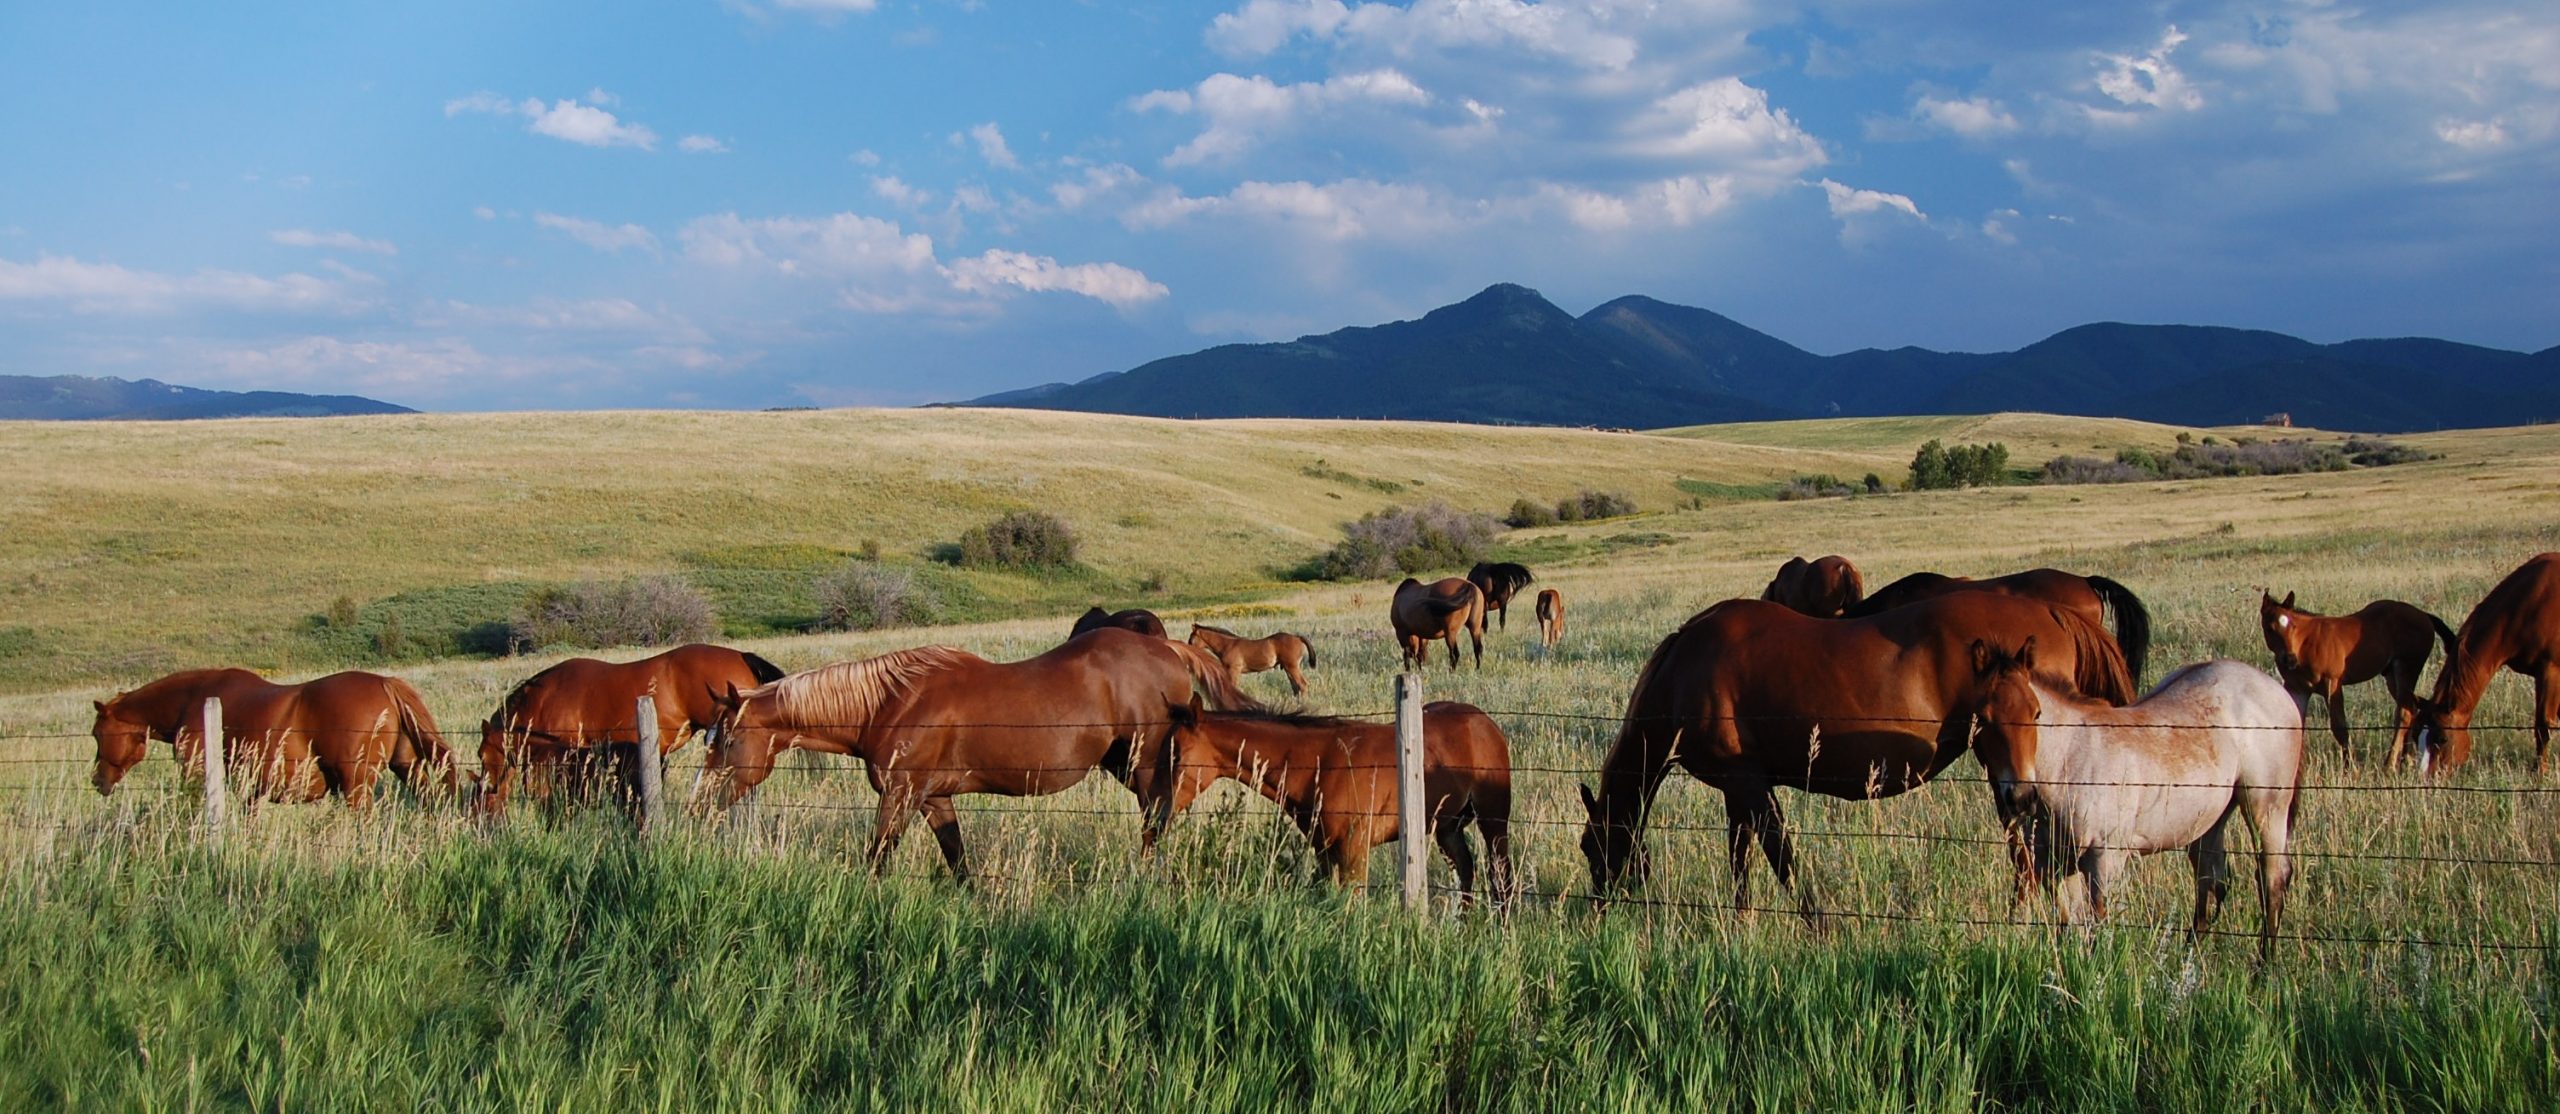 Montana Horse Property Listings $200,000 To $300,000